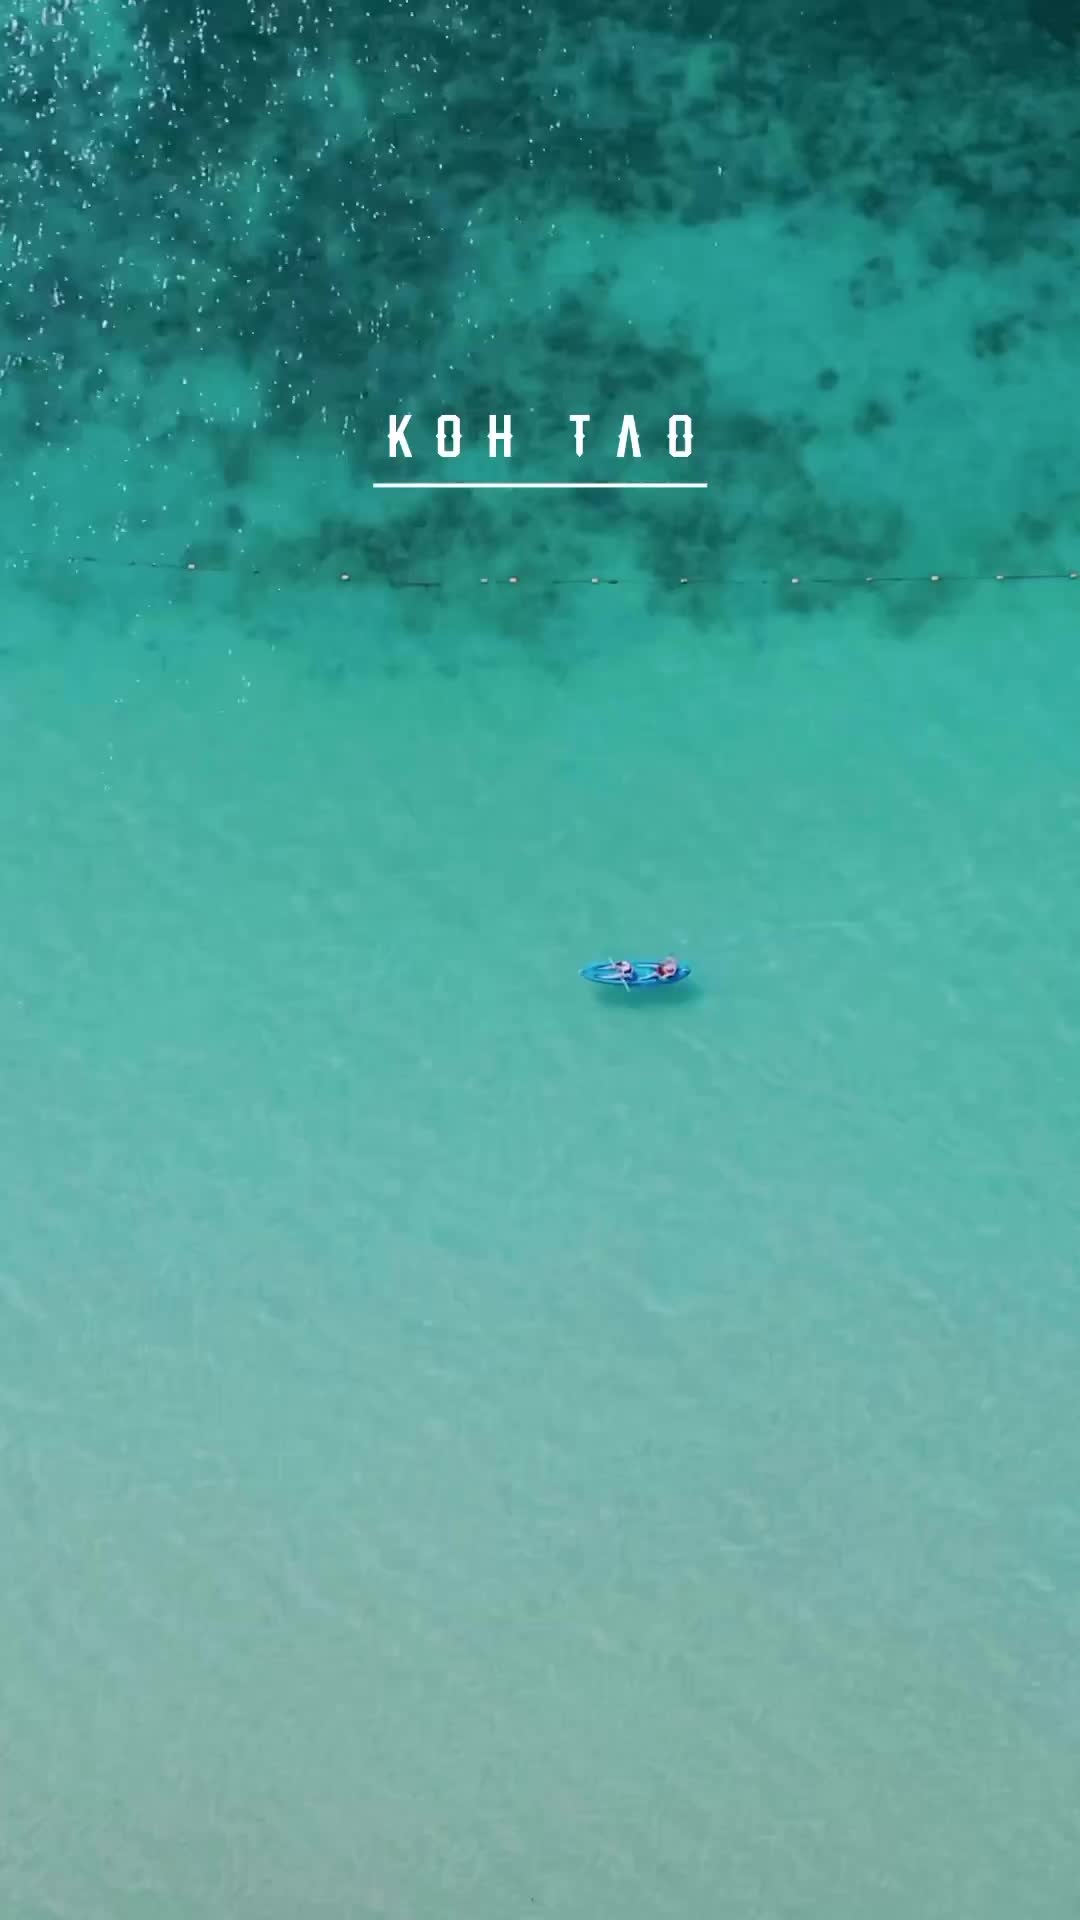 Koh Tao, you have my heart 💙
If you are visiting Thailand soon, highly recommended to add Koh Tao on your list

Koh Tao, Thailand 📍

📷 by @expeditioustraveler 
@djiglobal Mavic Air 2S

#kohtao #mustvisit #thailand #amazingthailand #thaiislands #tropical #tropicalvibes #travellingthroughtheworld